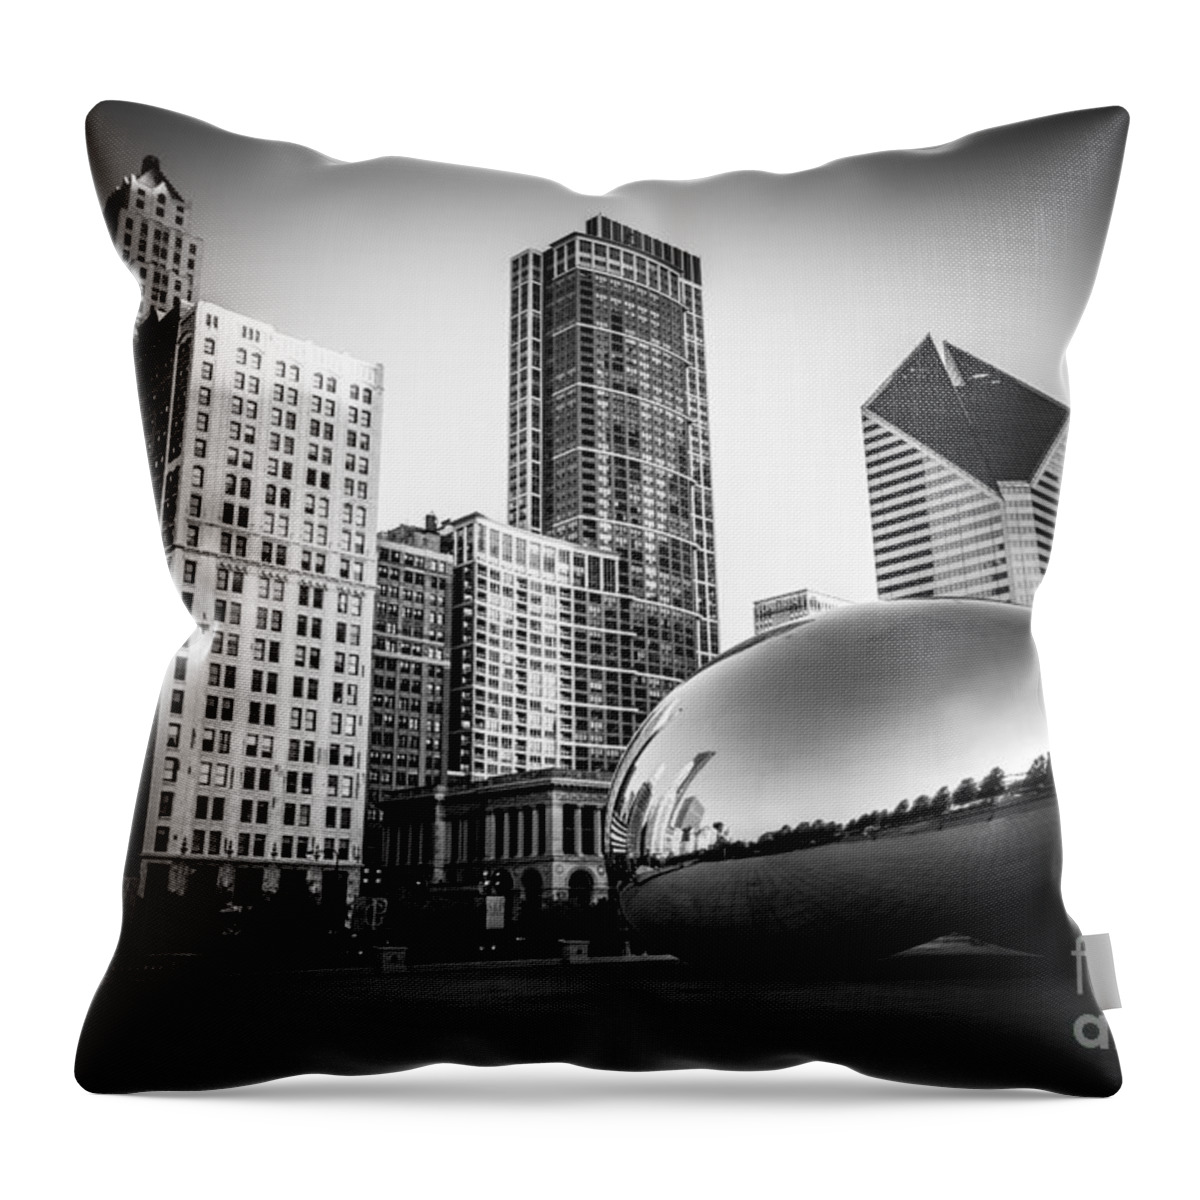 America Throw Pillow featuring the photograph Cloud Gate Bean Chicago Skyline in Black and White by Paul Velgos